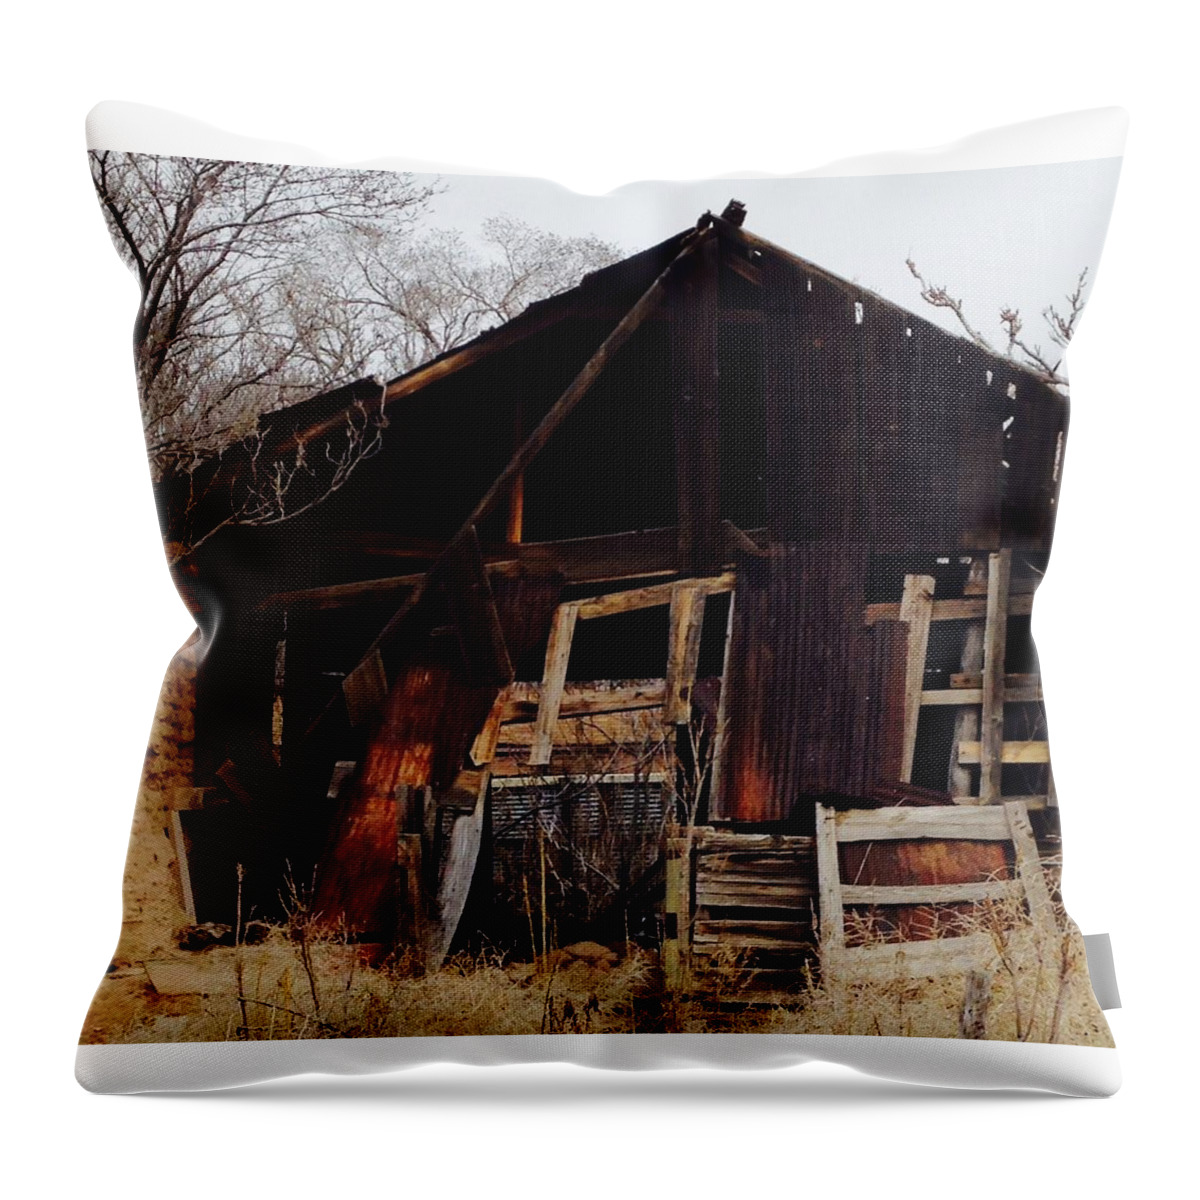 Shed Throw Pillow featuring the photograph Barn by Erika Jean Chamberlin